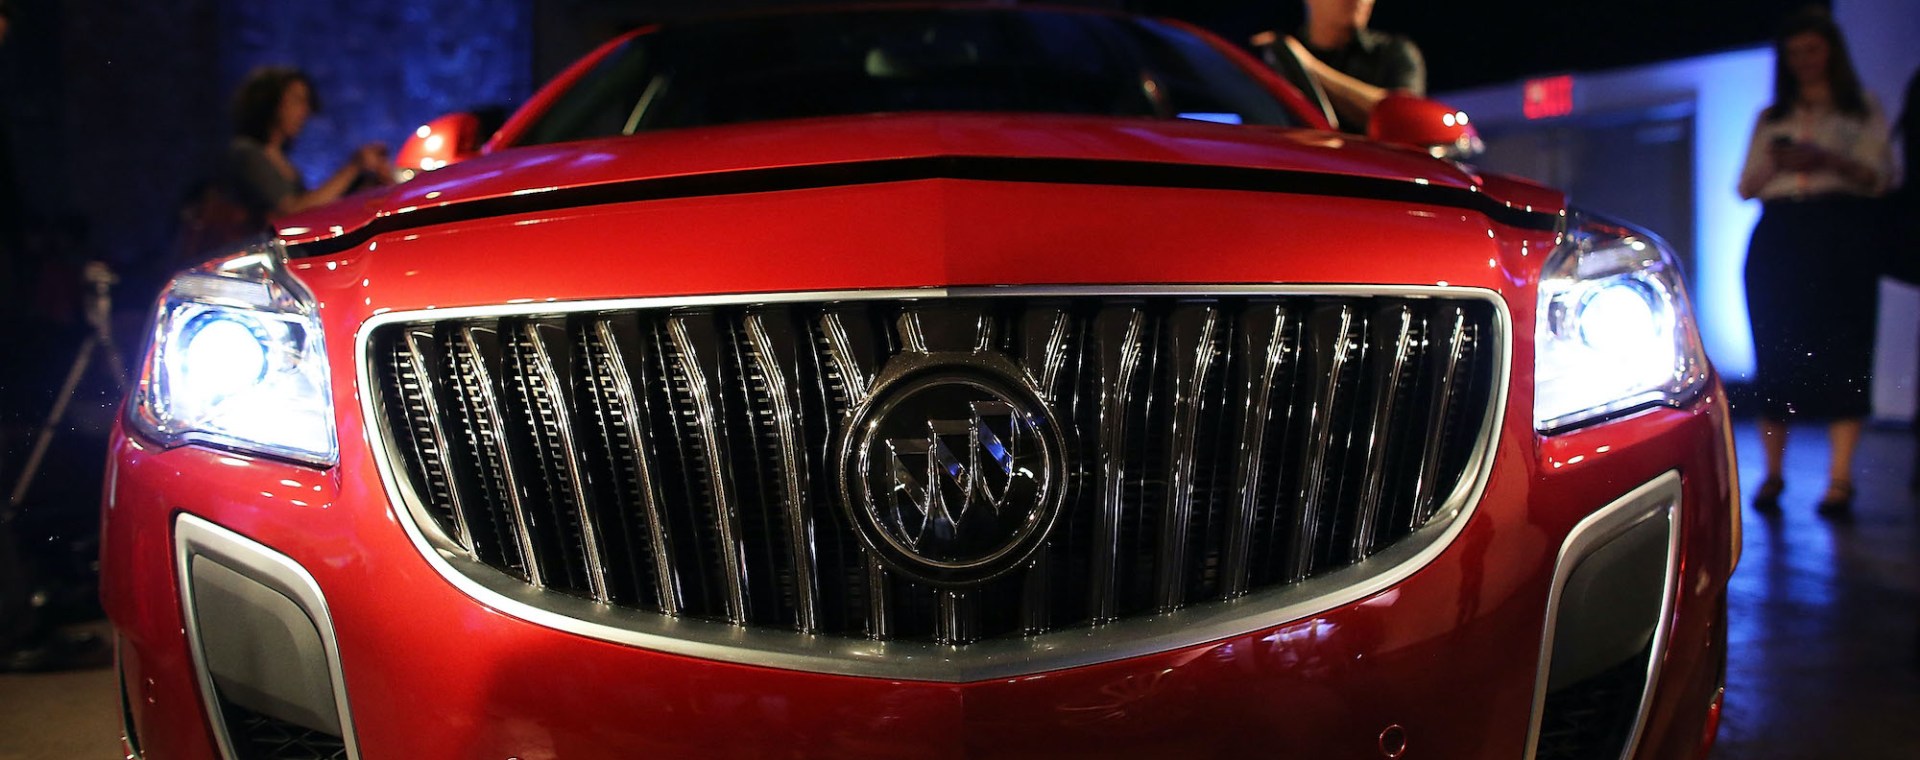 The new 2014 Buick Regal GS is displayed at a launch party for new versions of General Motors Company